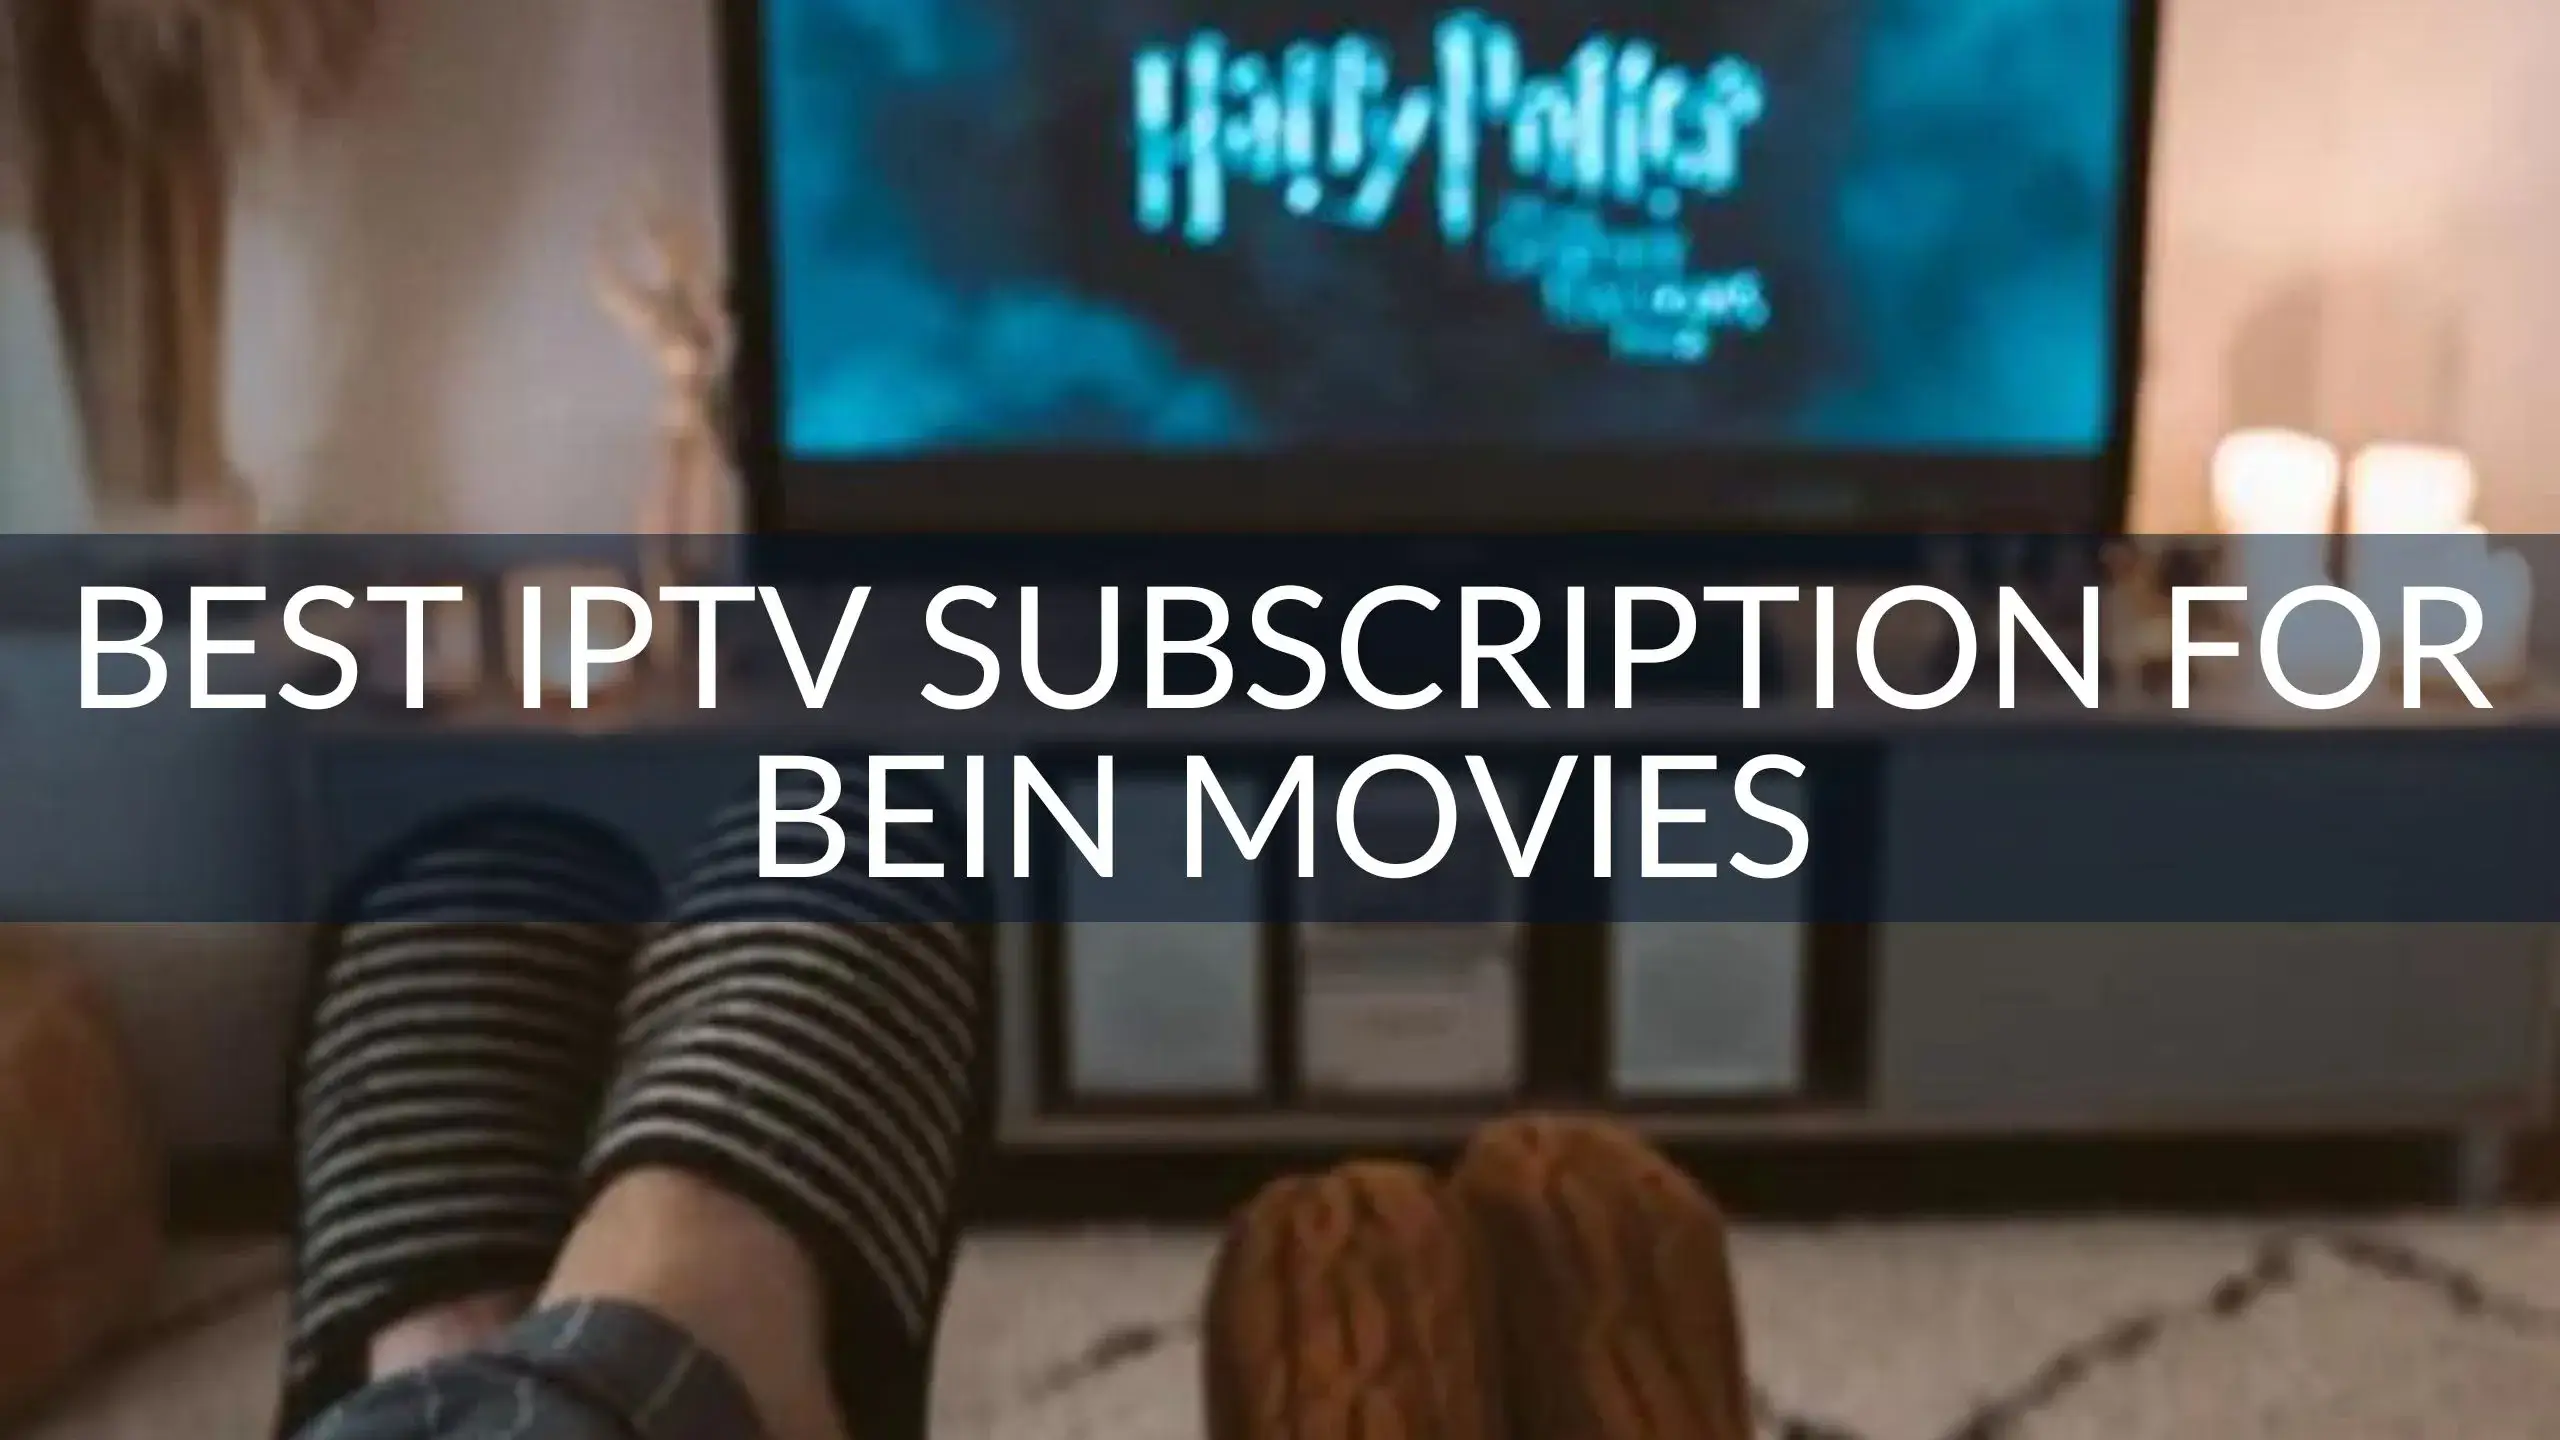 Best IPTV Subscription for Bein Movies